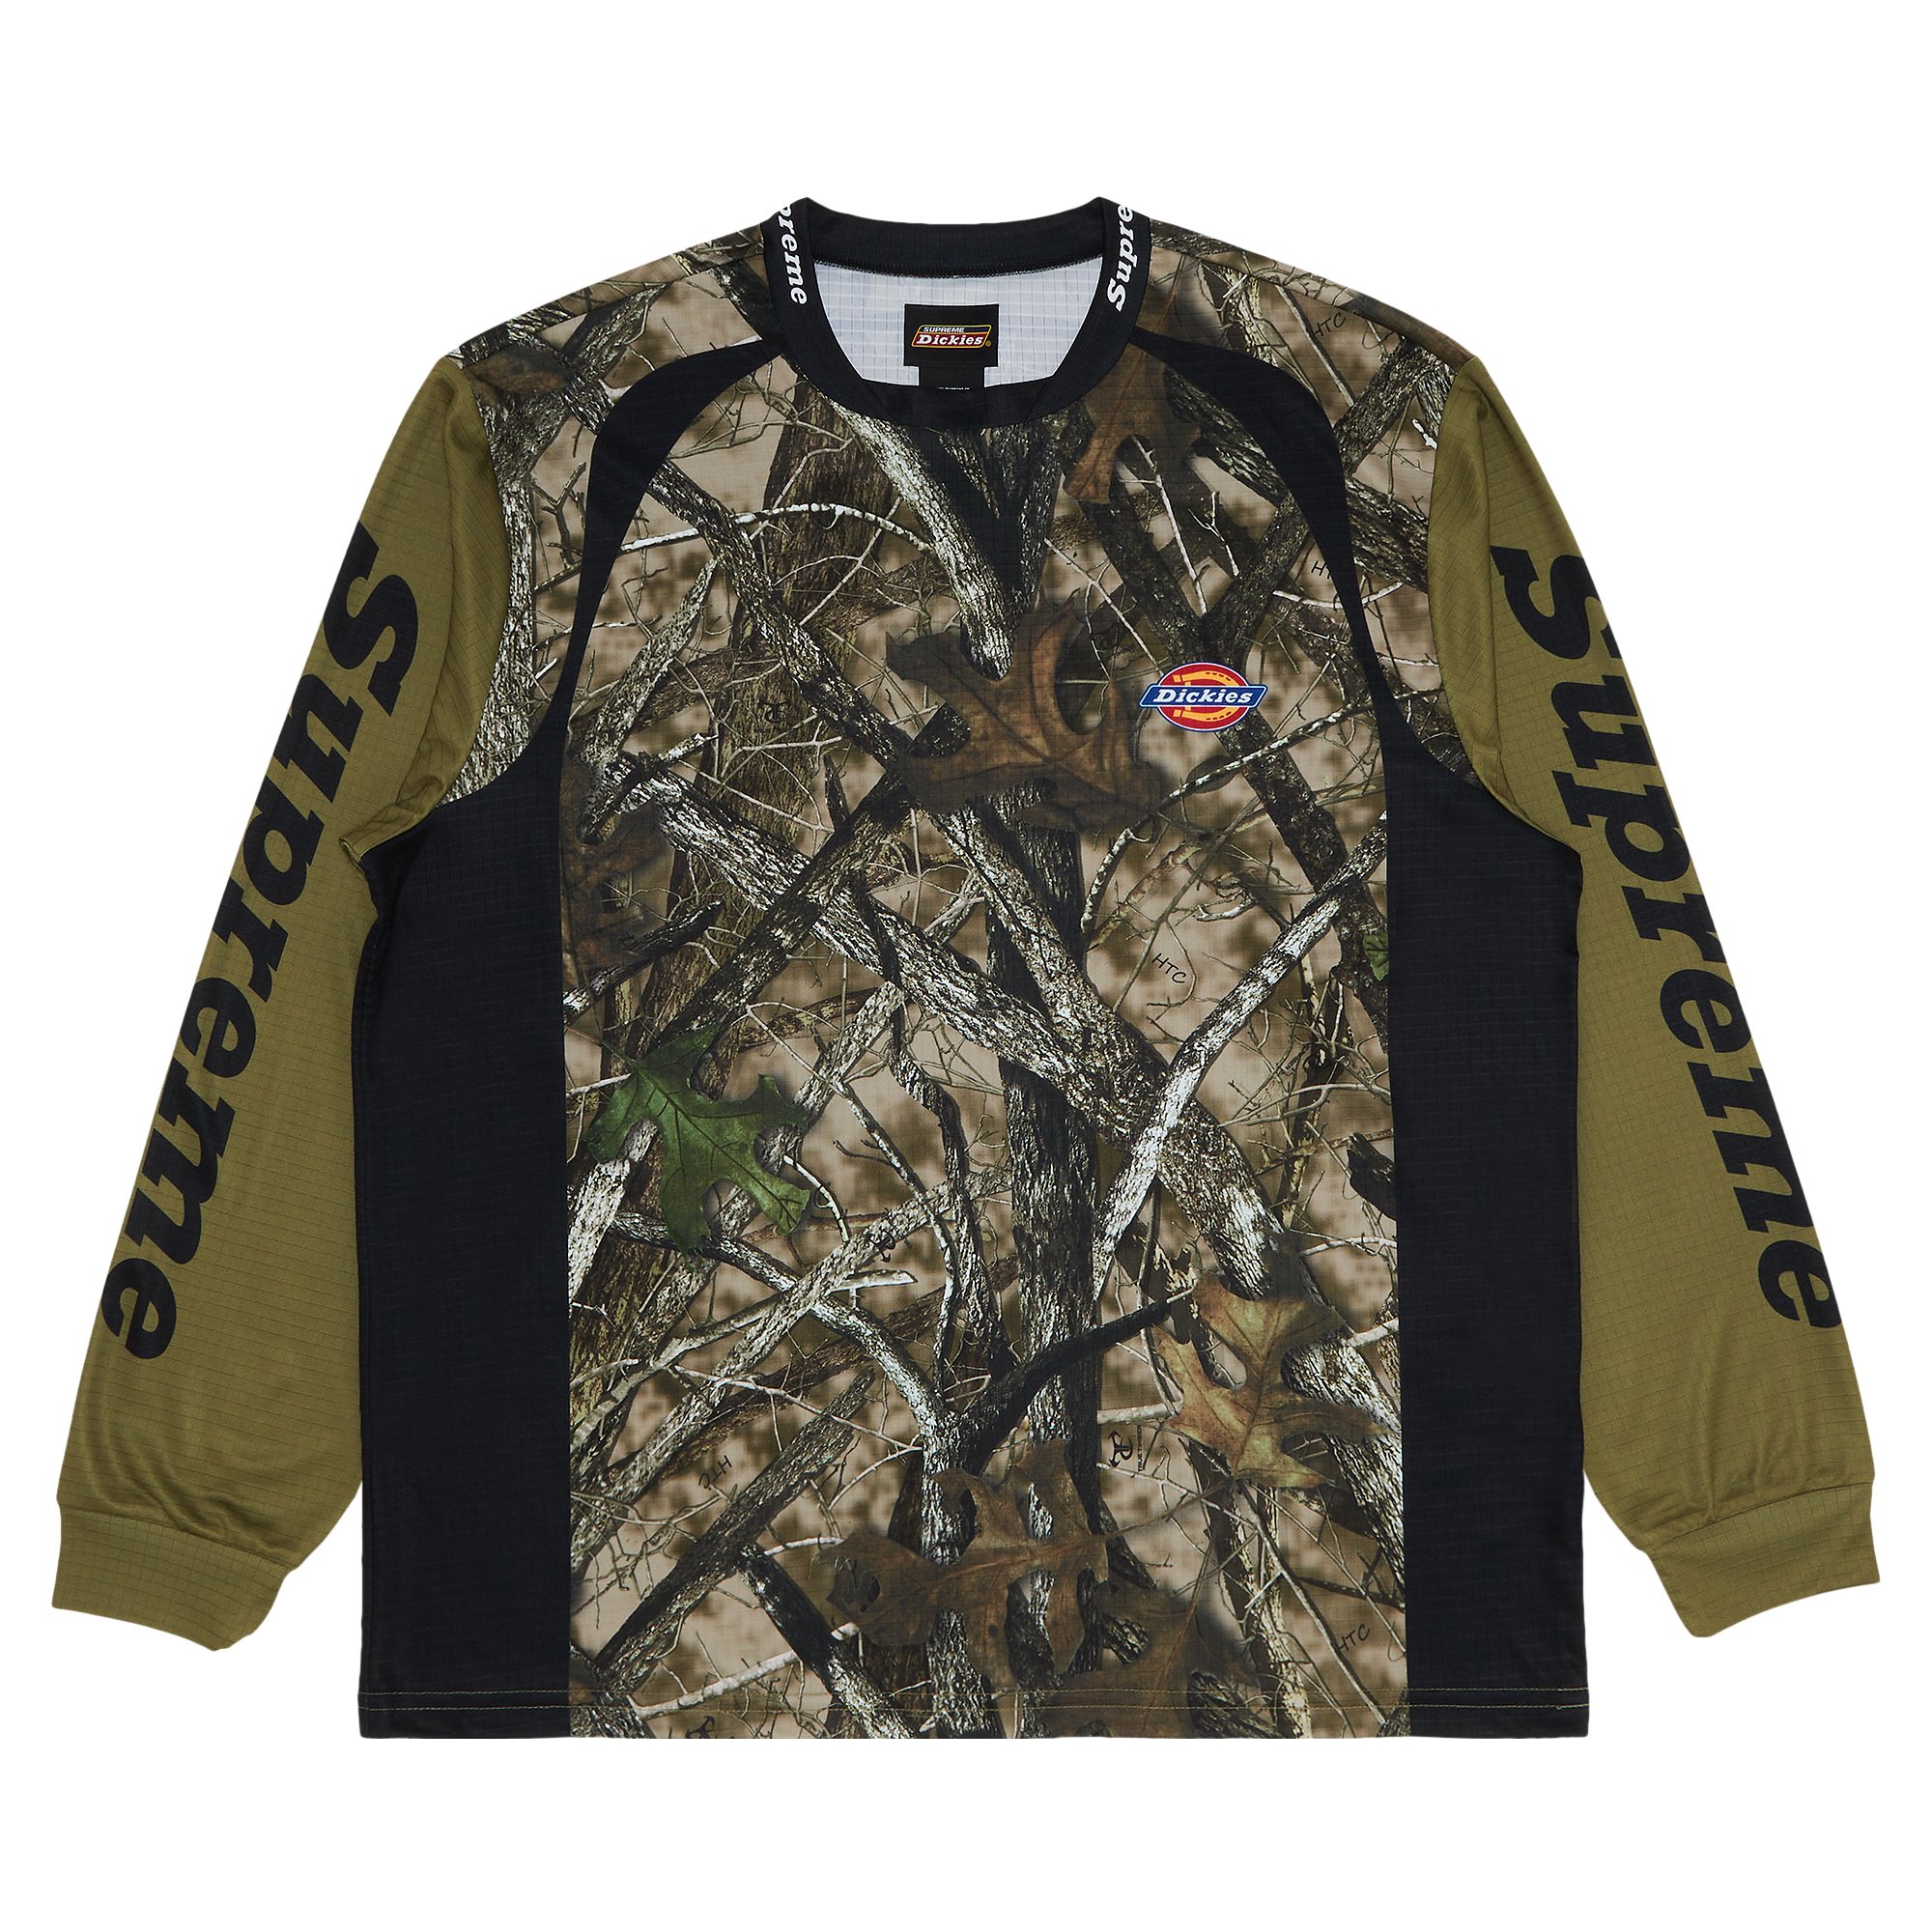 Supreme x Dickies Jersey 'Olive'